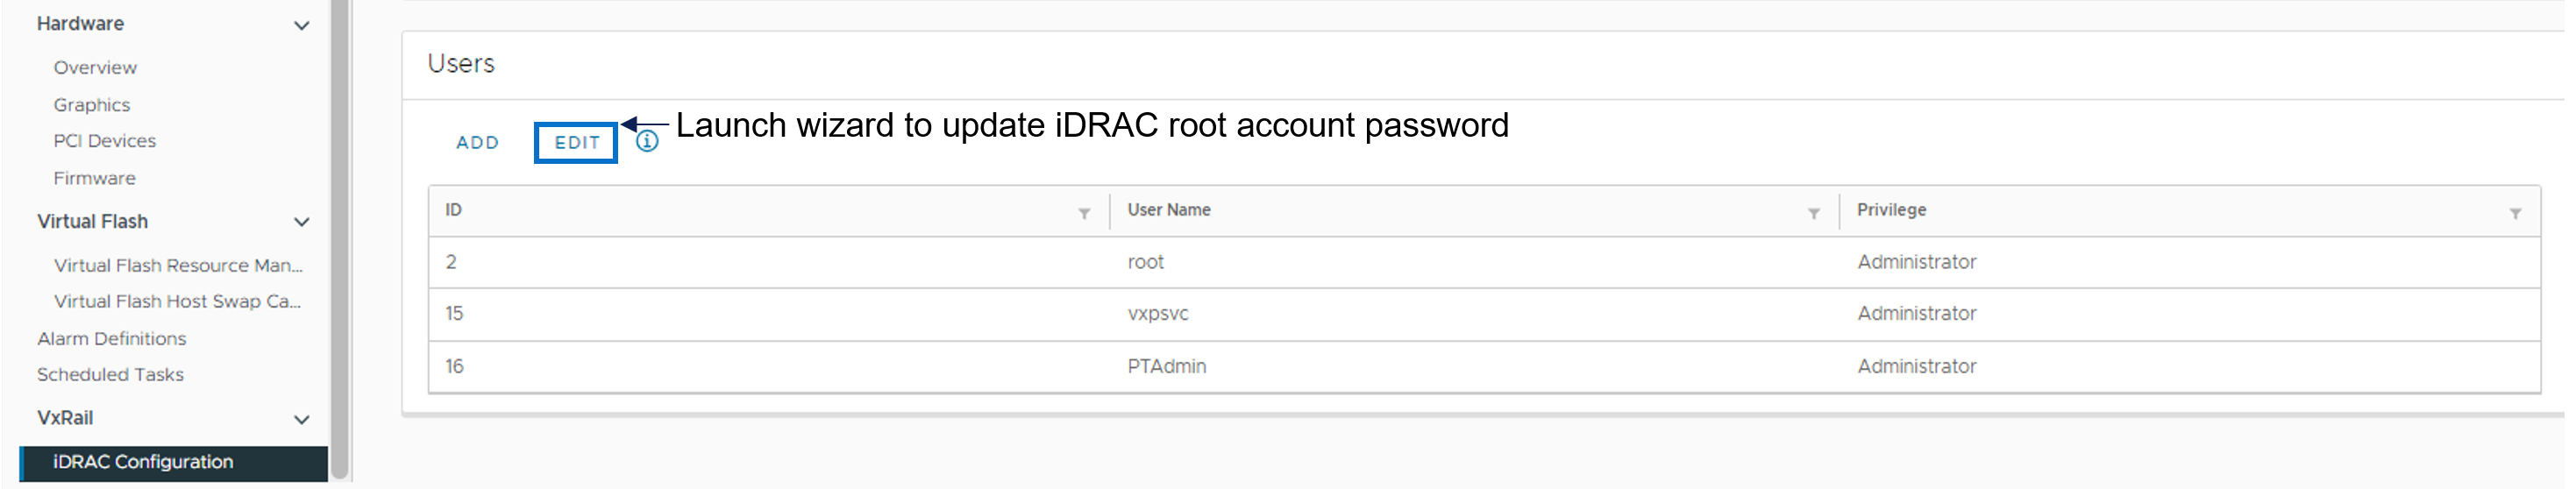 This shows how to update the iDRAC root account password. Go to the iDRAC Configuration tab on the left-hand menu, then select edit to launch a wizard to change the password.